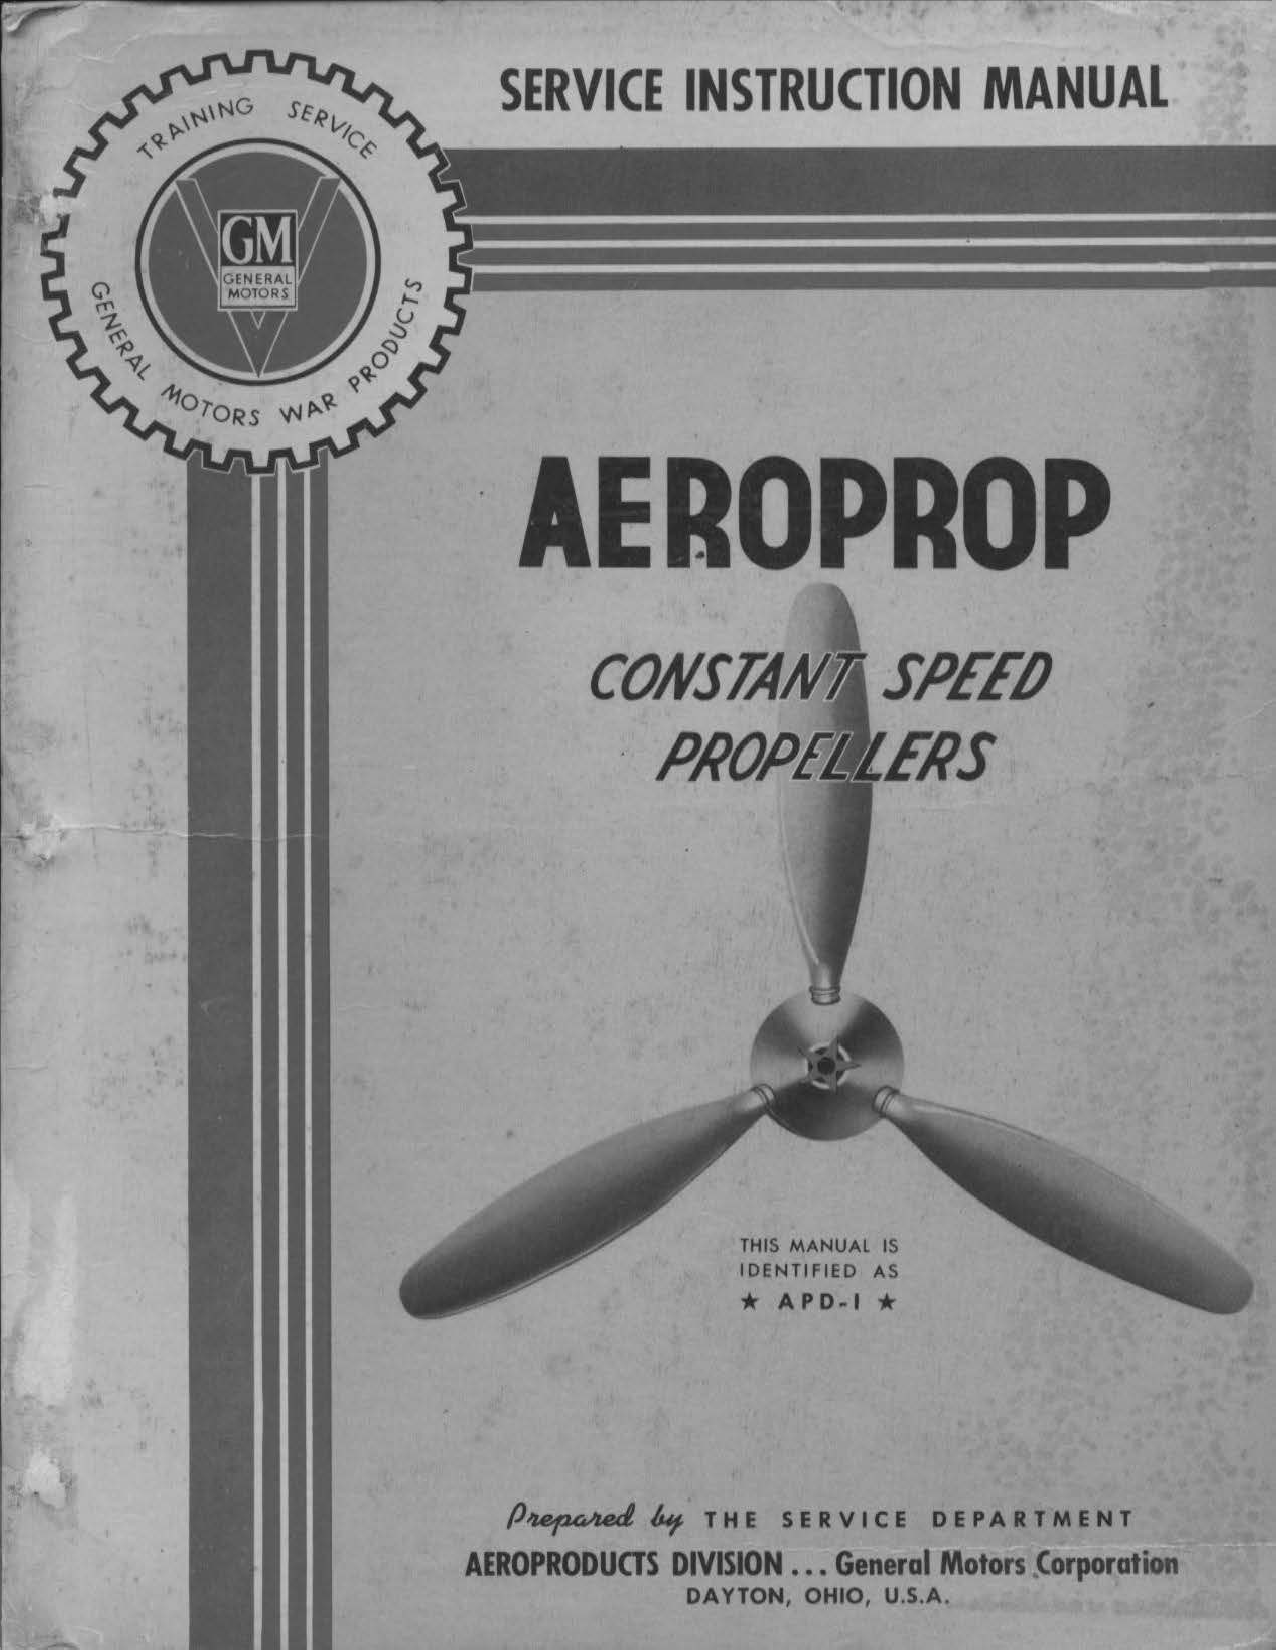 Sample page 1 from AirCorps Library document: Service Instructions for Aeroprop Constant Speed Propellers